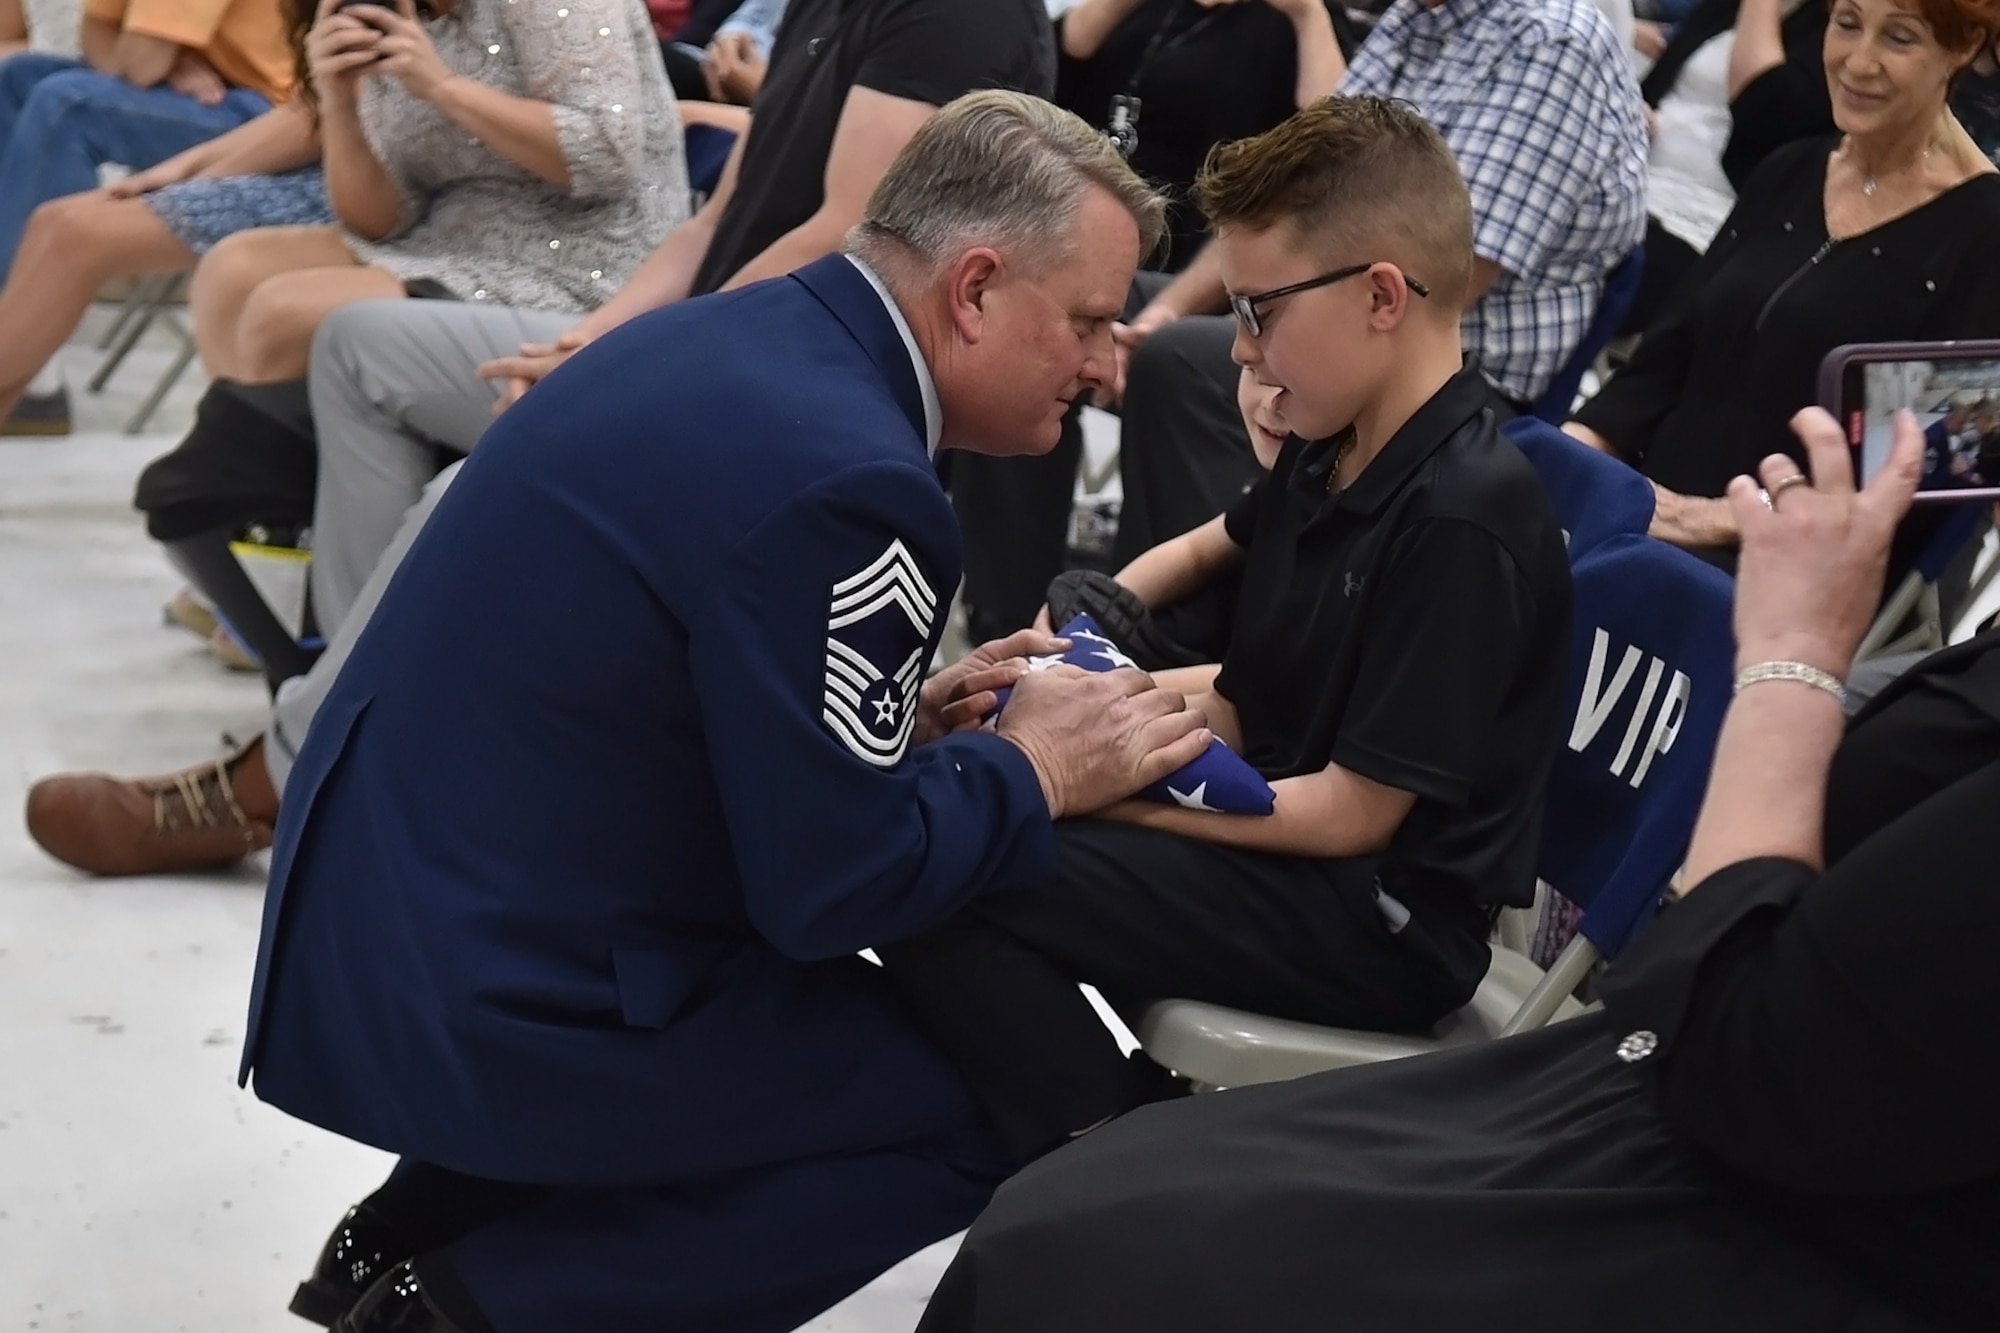 Chief Master Sgt. Chad Weisend hands off his folded flag to his grandson Karston Black during his retirement ceremony held at Grissom Air Reserve Base, Ind., May 1, 2021. Weisend retired as after 36 years of service. (U.S. Air Force Photo/ Tech. Sgt. Jami K. Lancette)